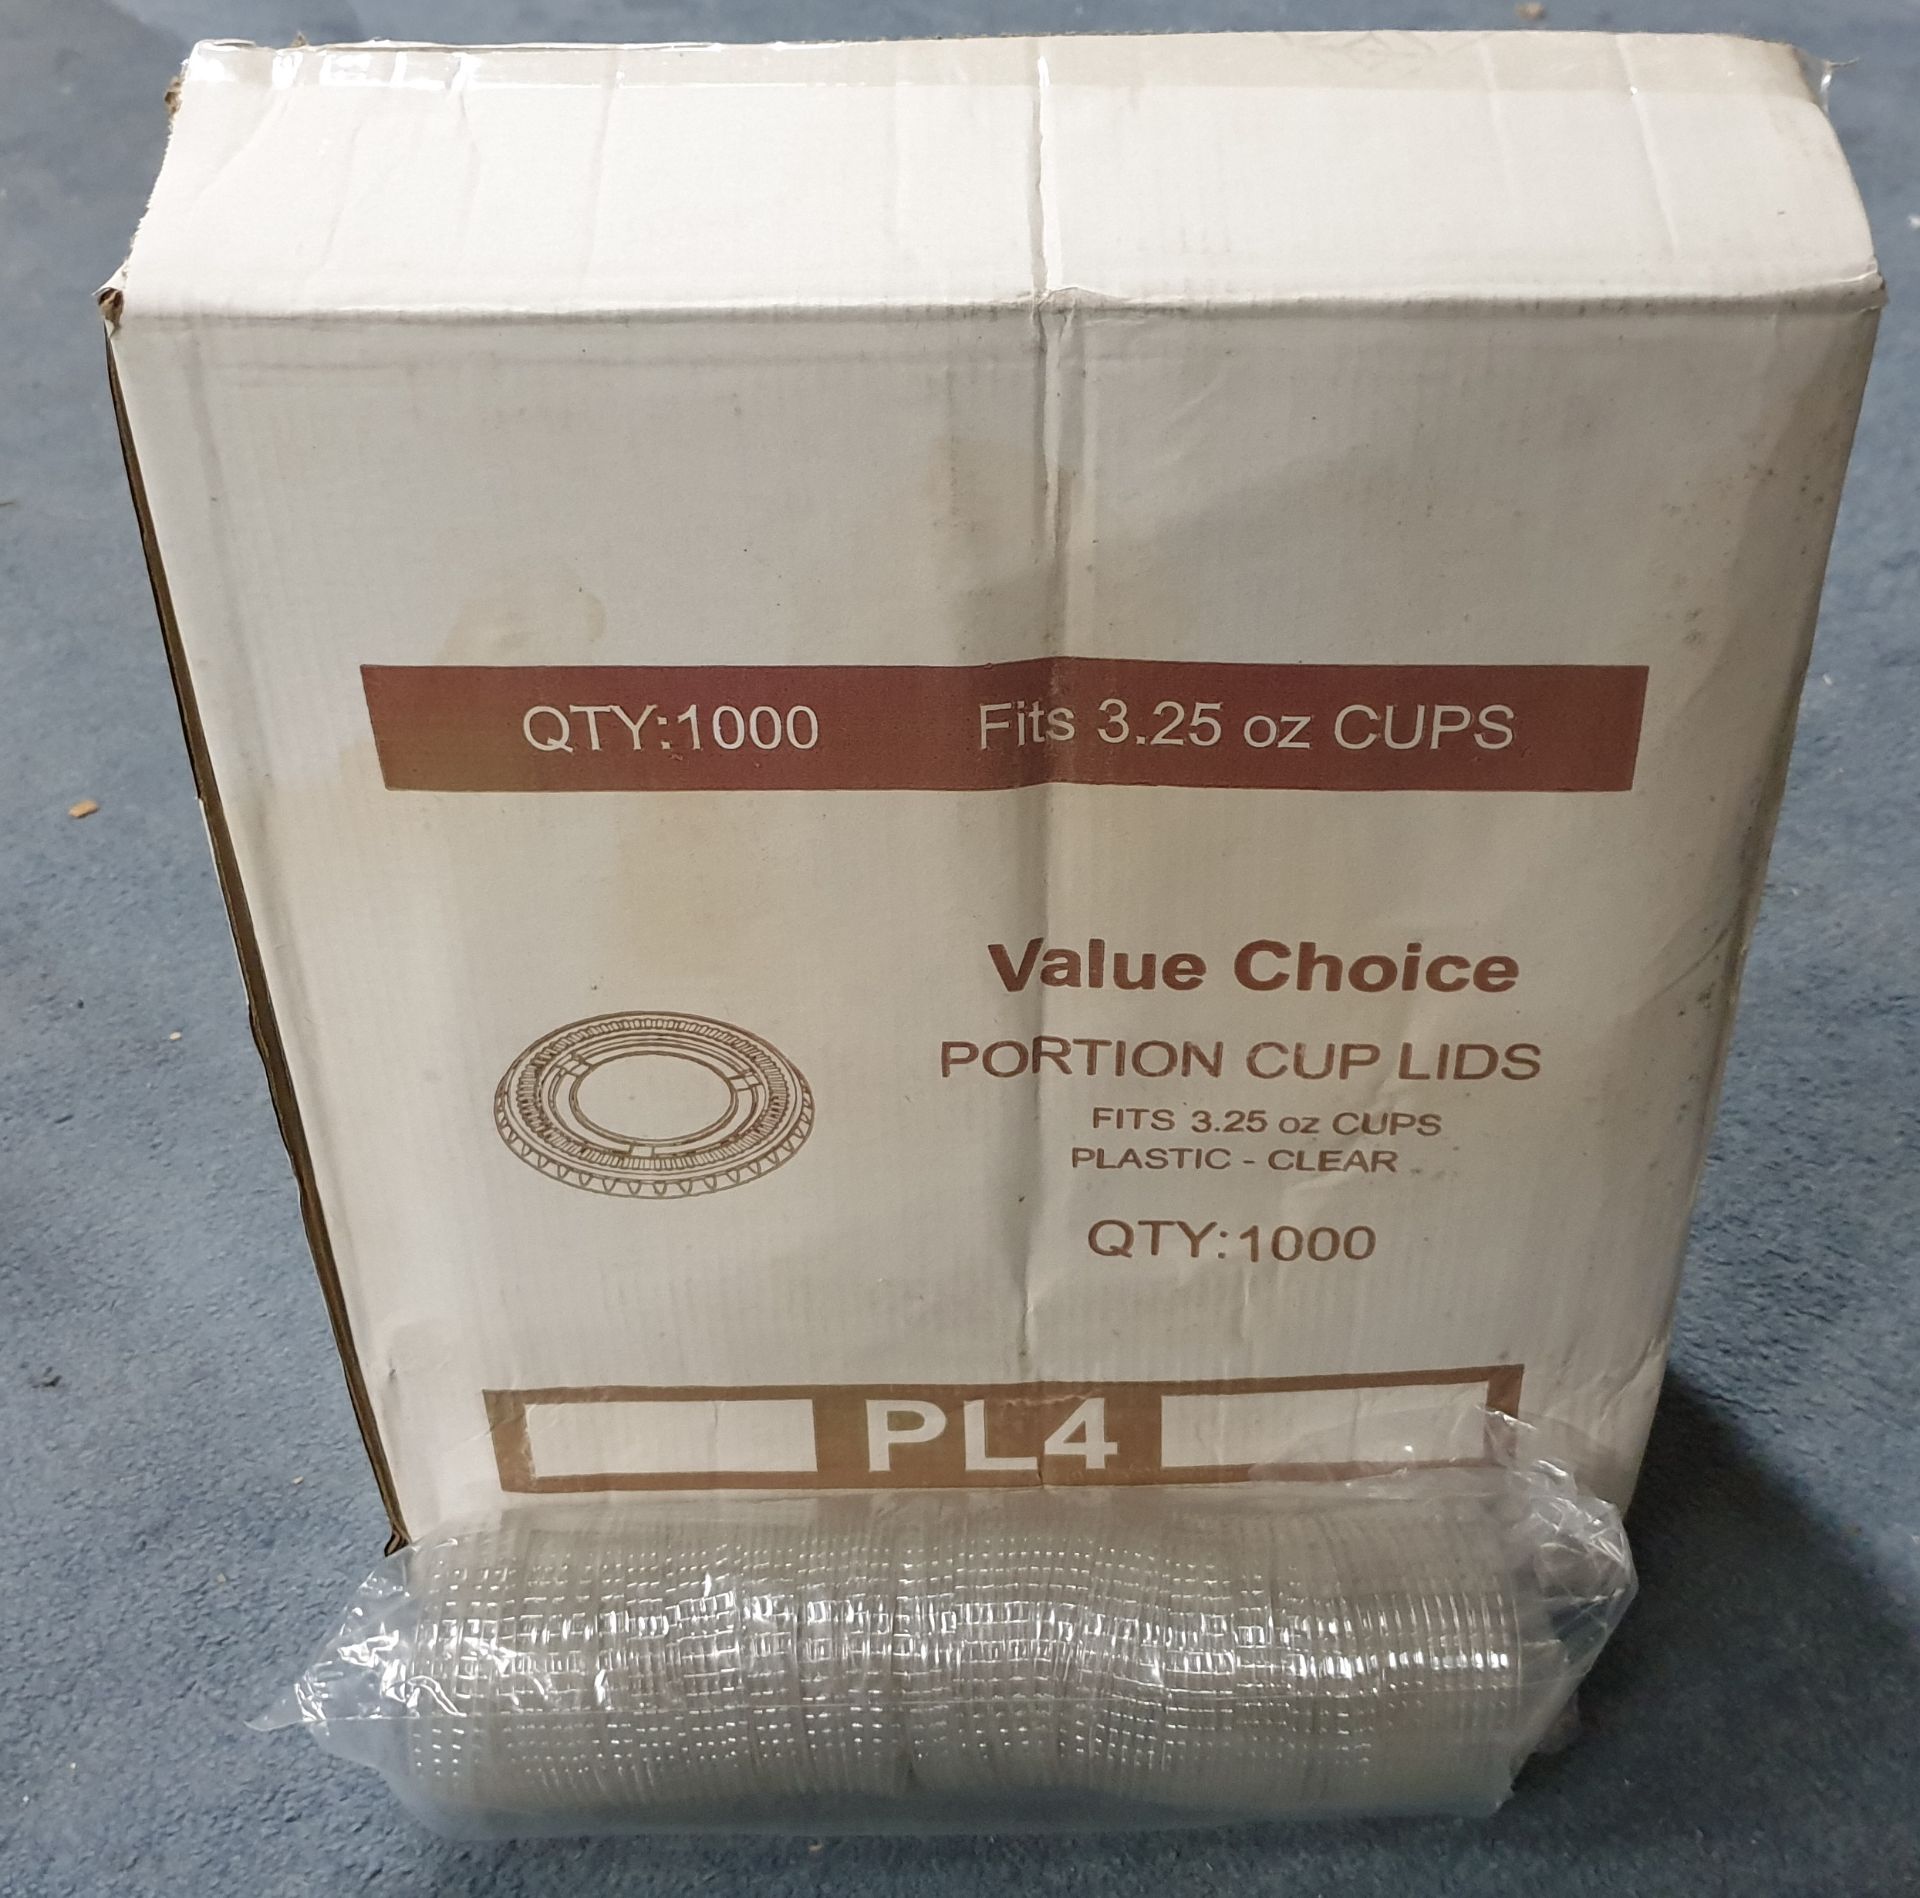 10 x Boxes of Portion Cups/Lids by Value Choice - Image 2 of 2